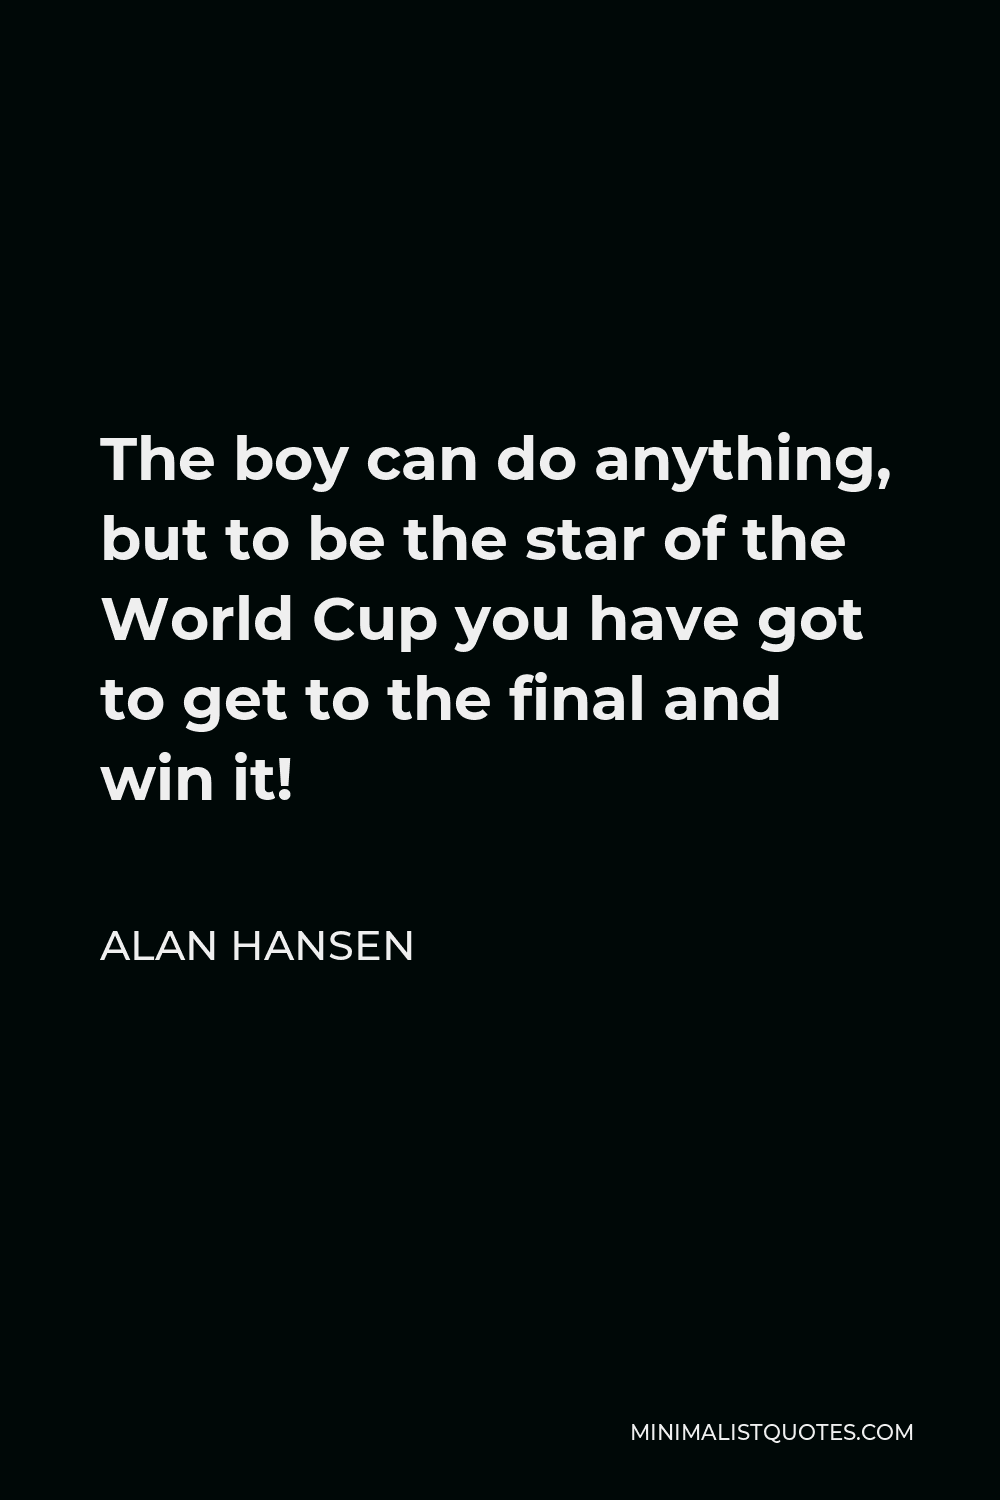 Alan Hansen Quote - The boy can do anything, but to be the star of the World Cup you have got to get to the final and win it!